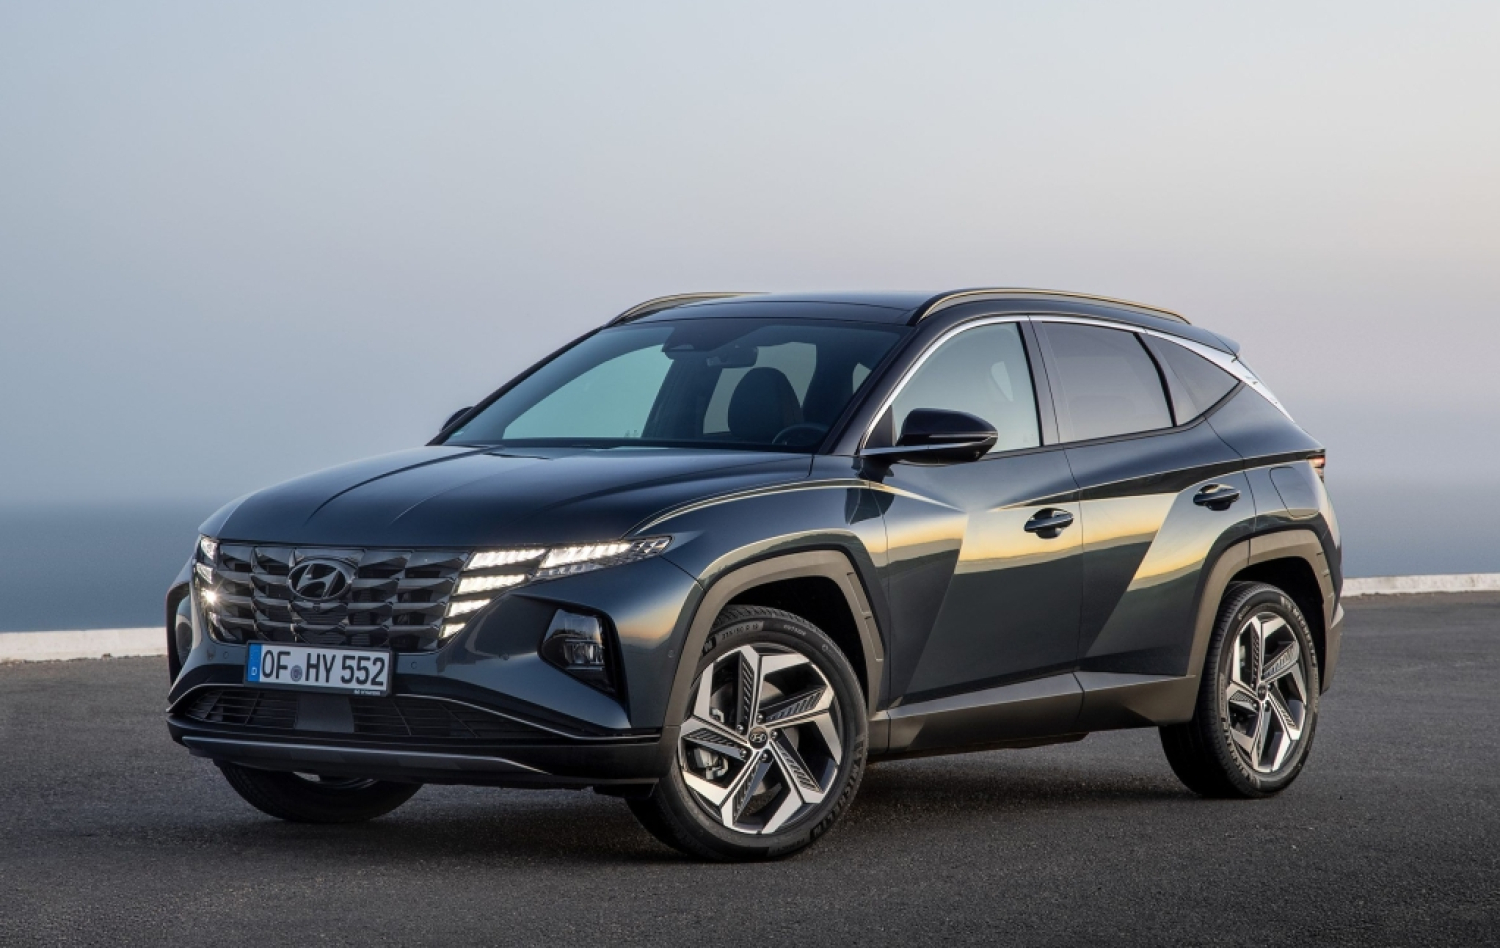 Hyundai of Nosovice produced the most cars last year since 2017